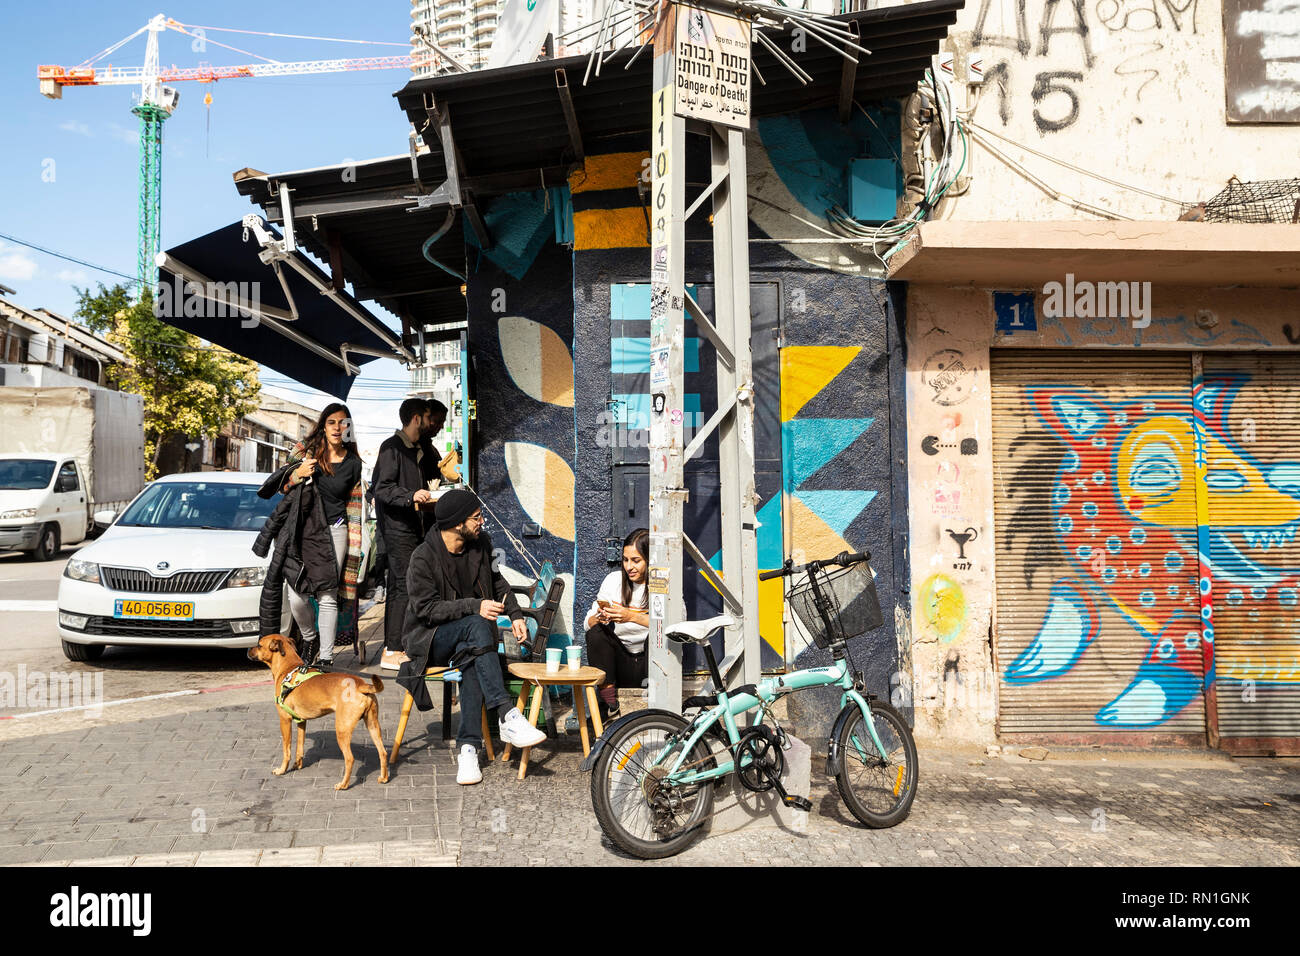 Tel Aviv-Yafo, Tel Aviv, Israel - December 28, 2018: Young Israeli people with a dog and bike, chatting and relaxing in caffe shop, Florentin district Stock Photo